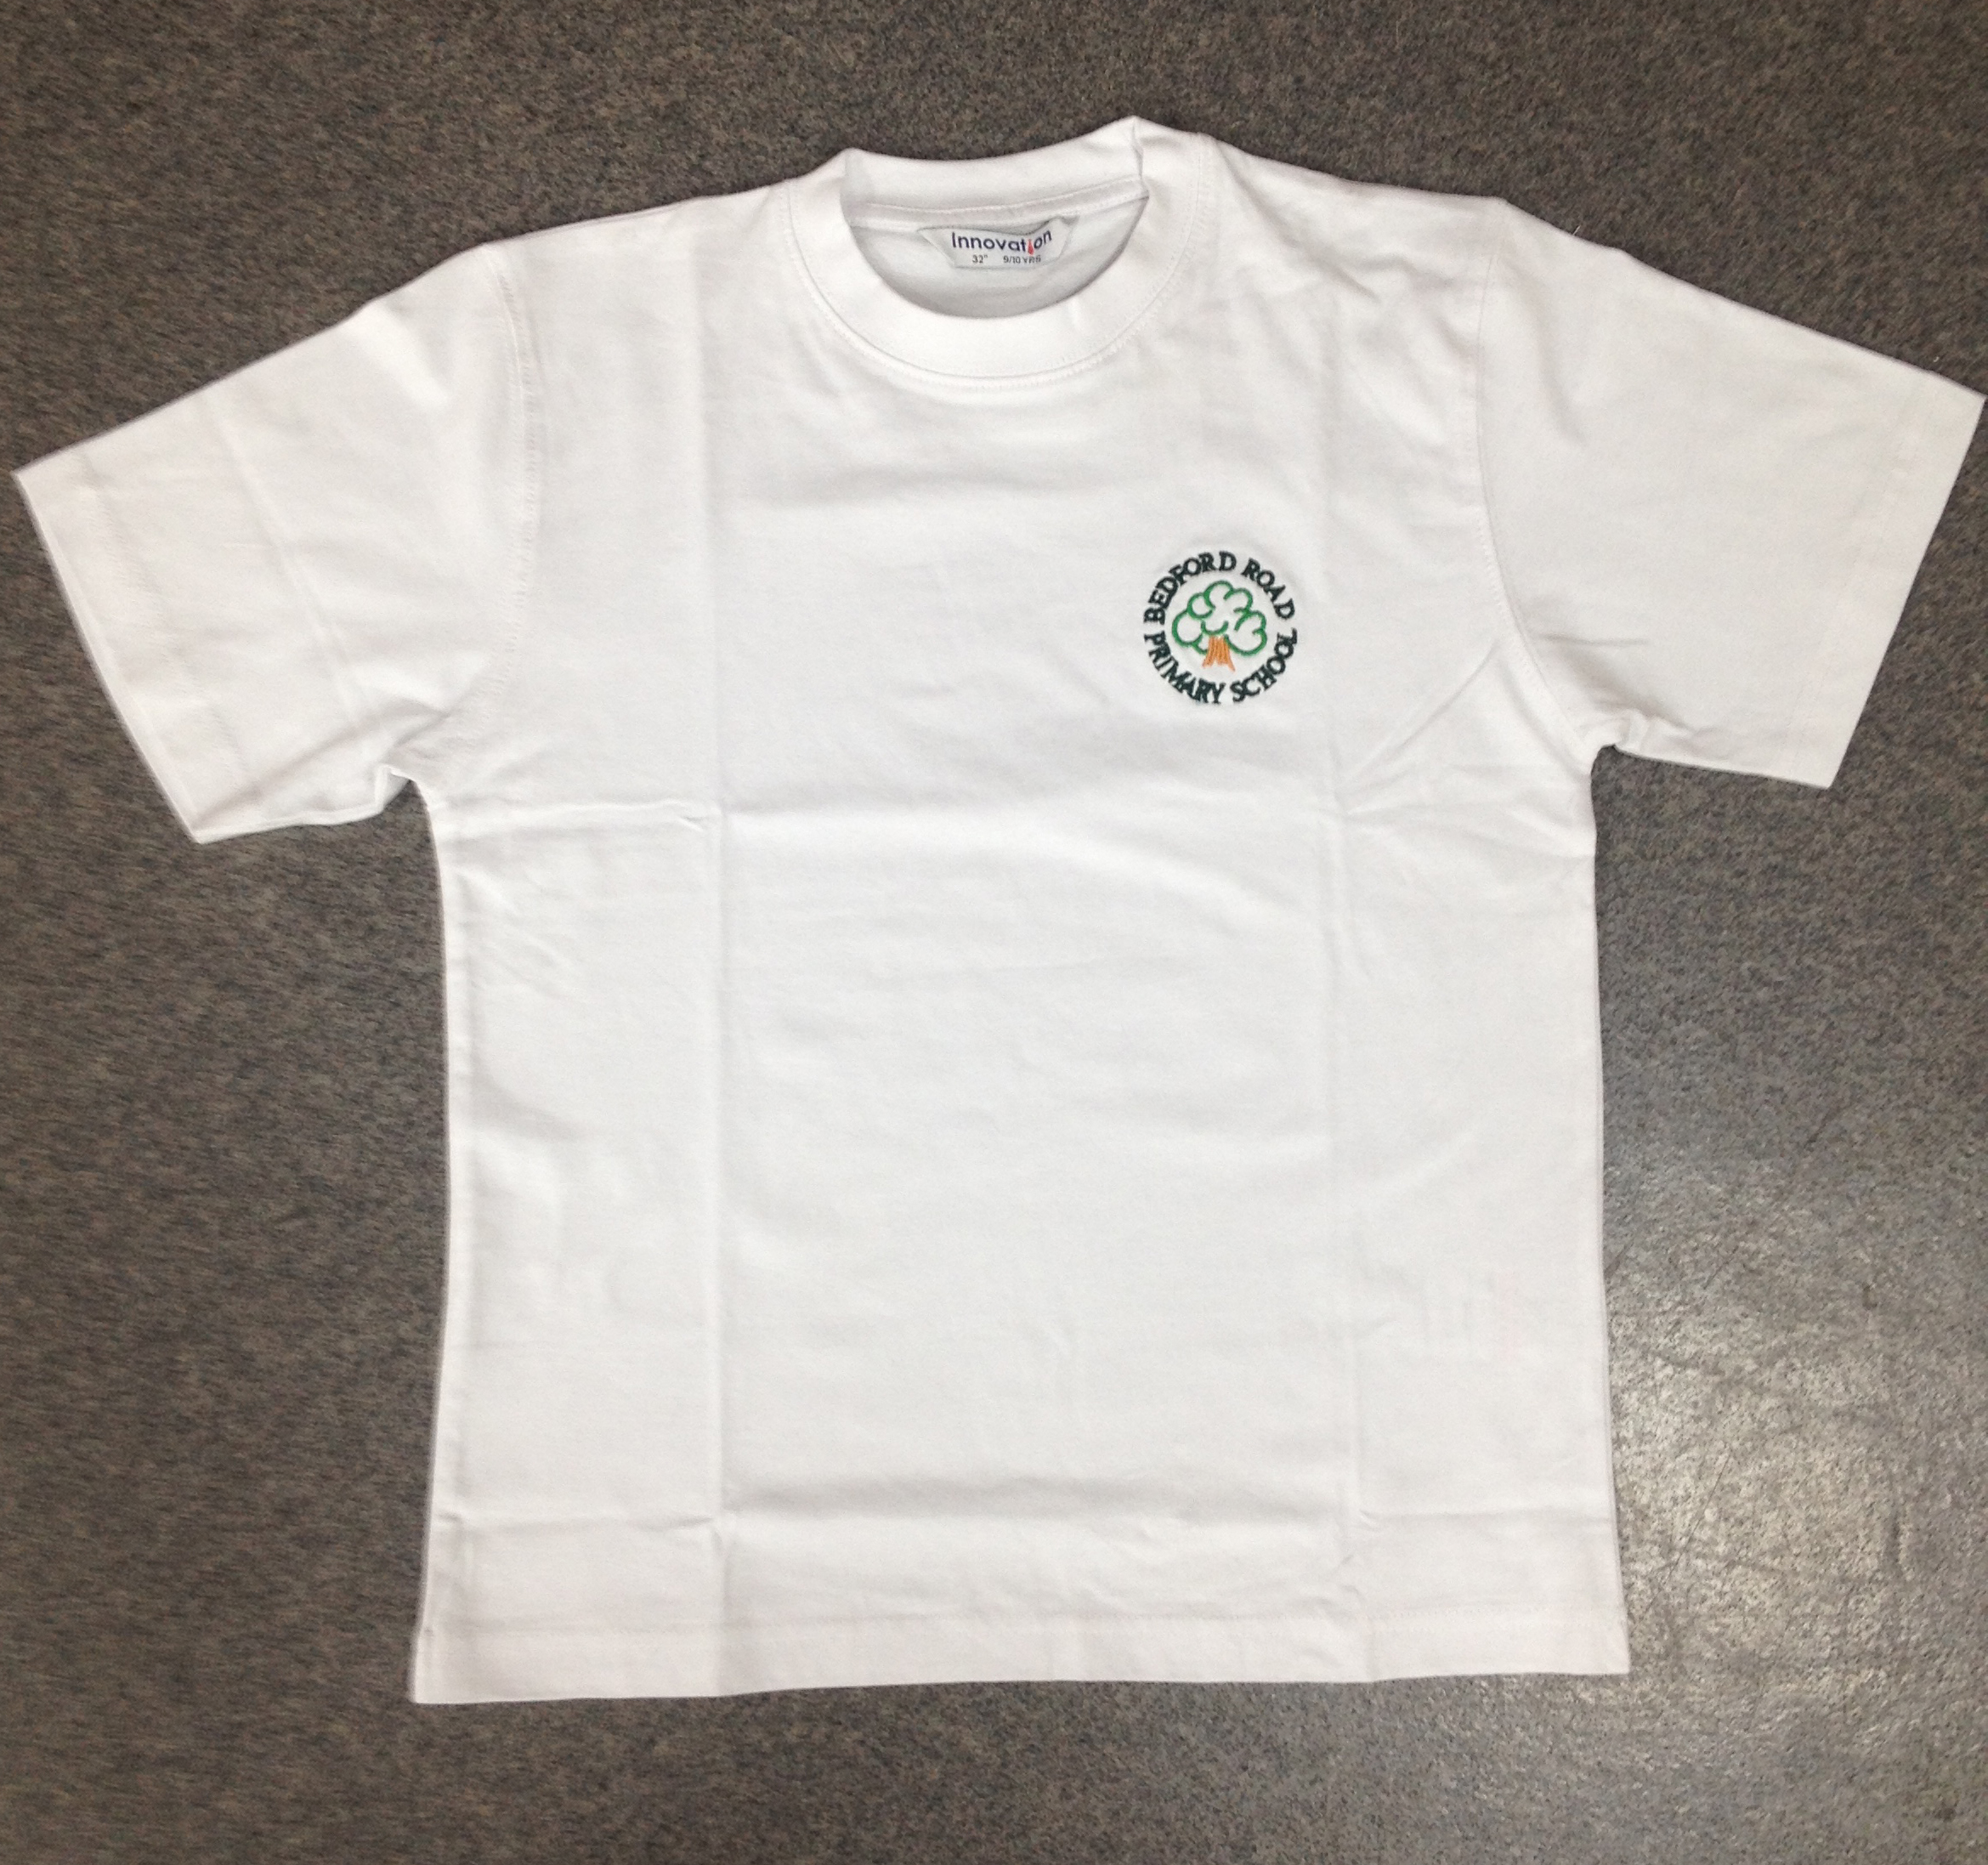 Bedford Road Primary PE T-Shirt (White)